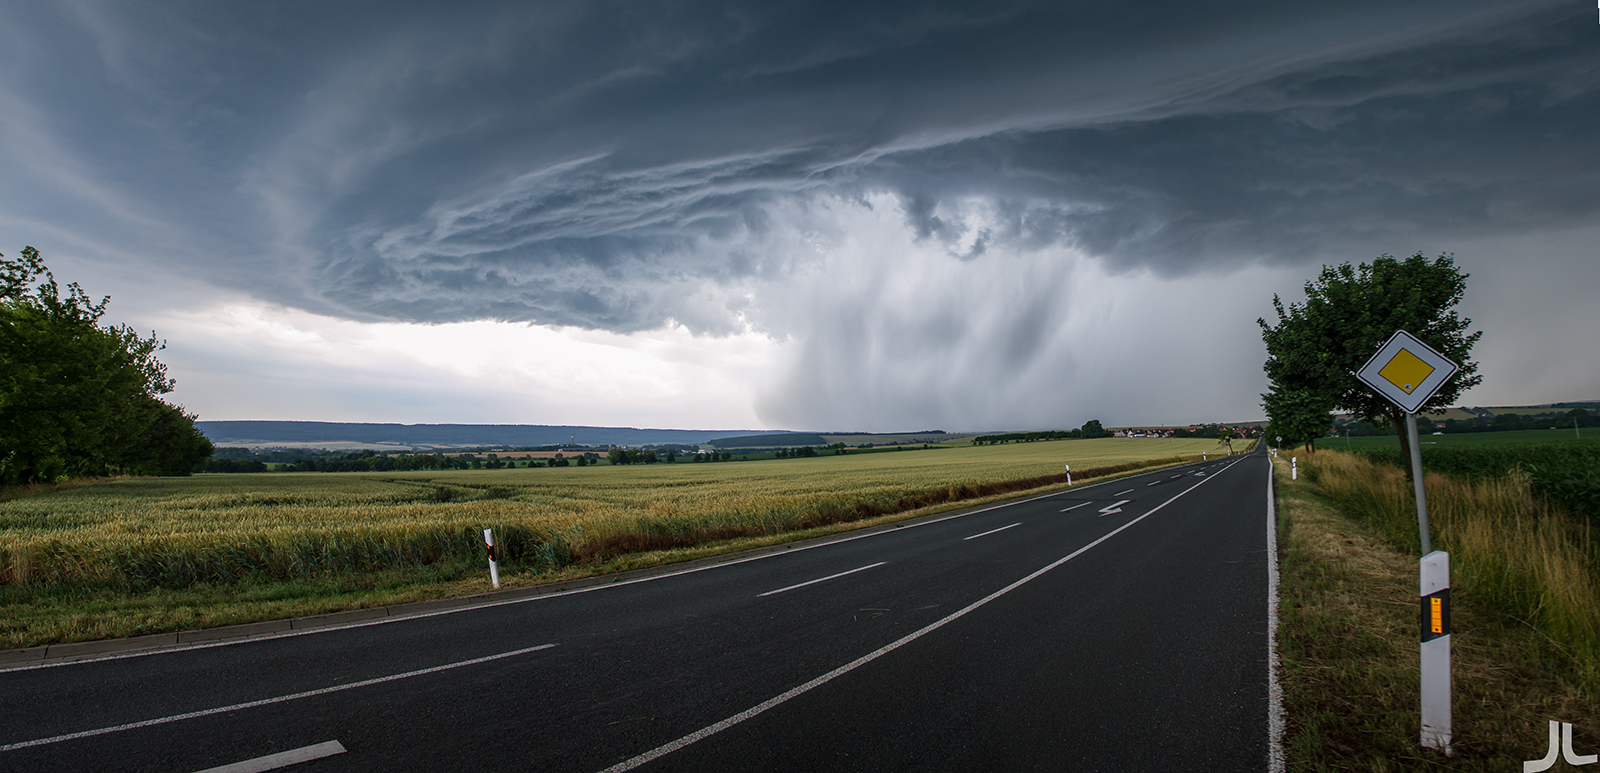 Supercell in middle Germany